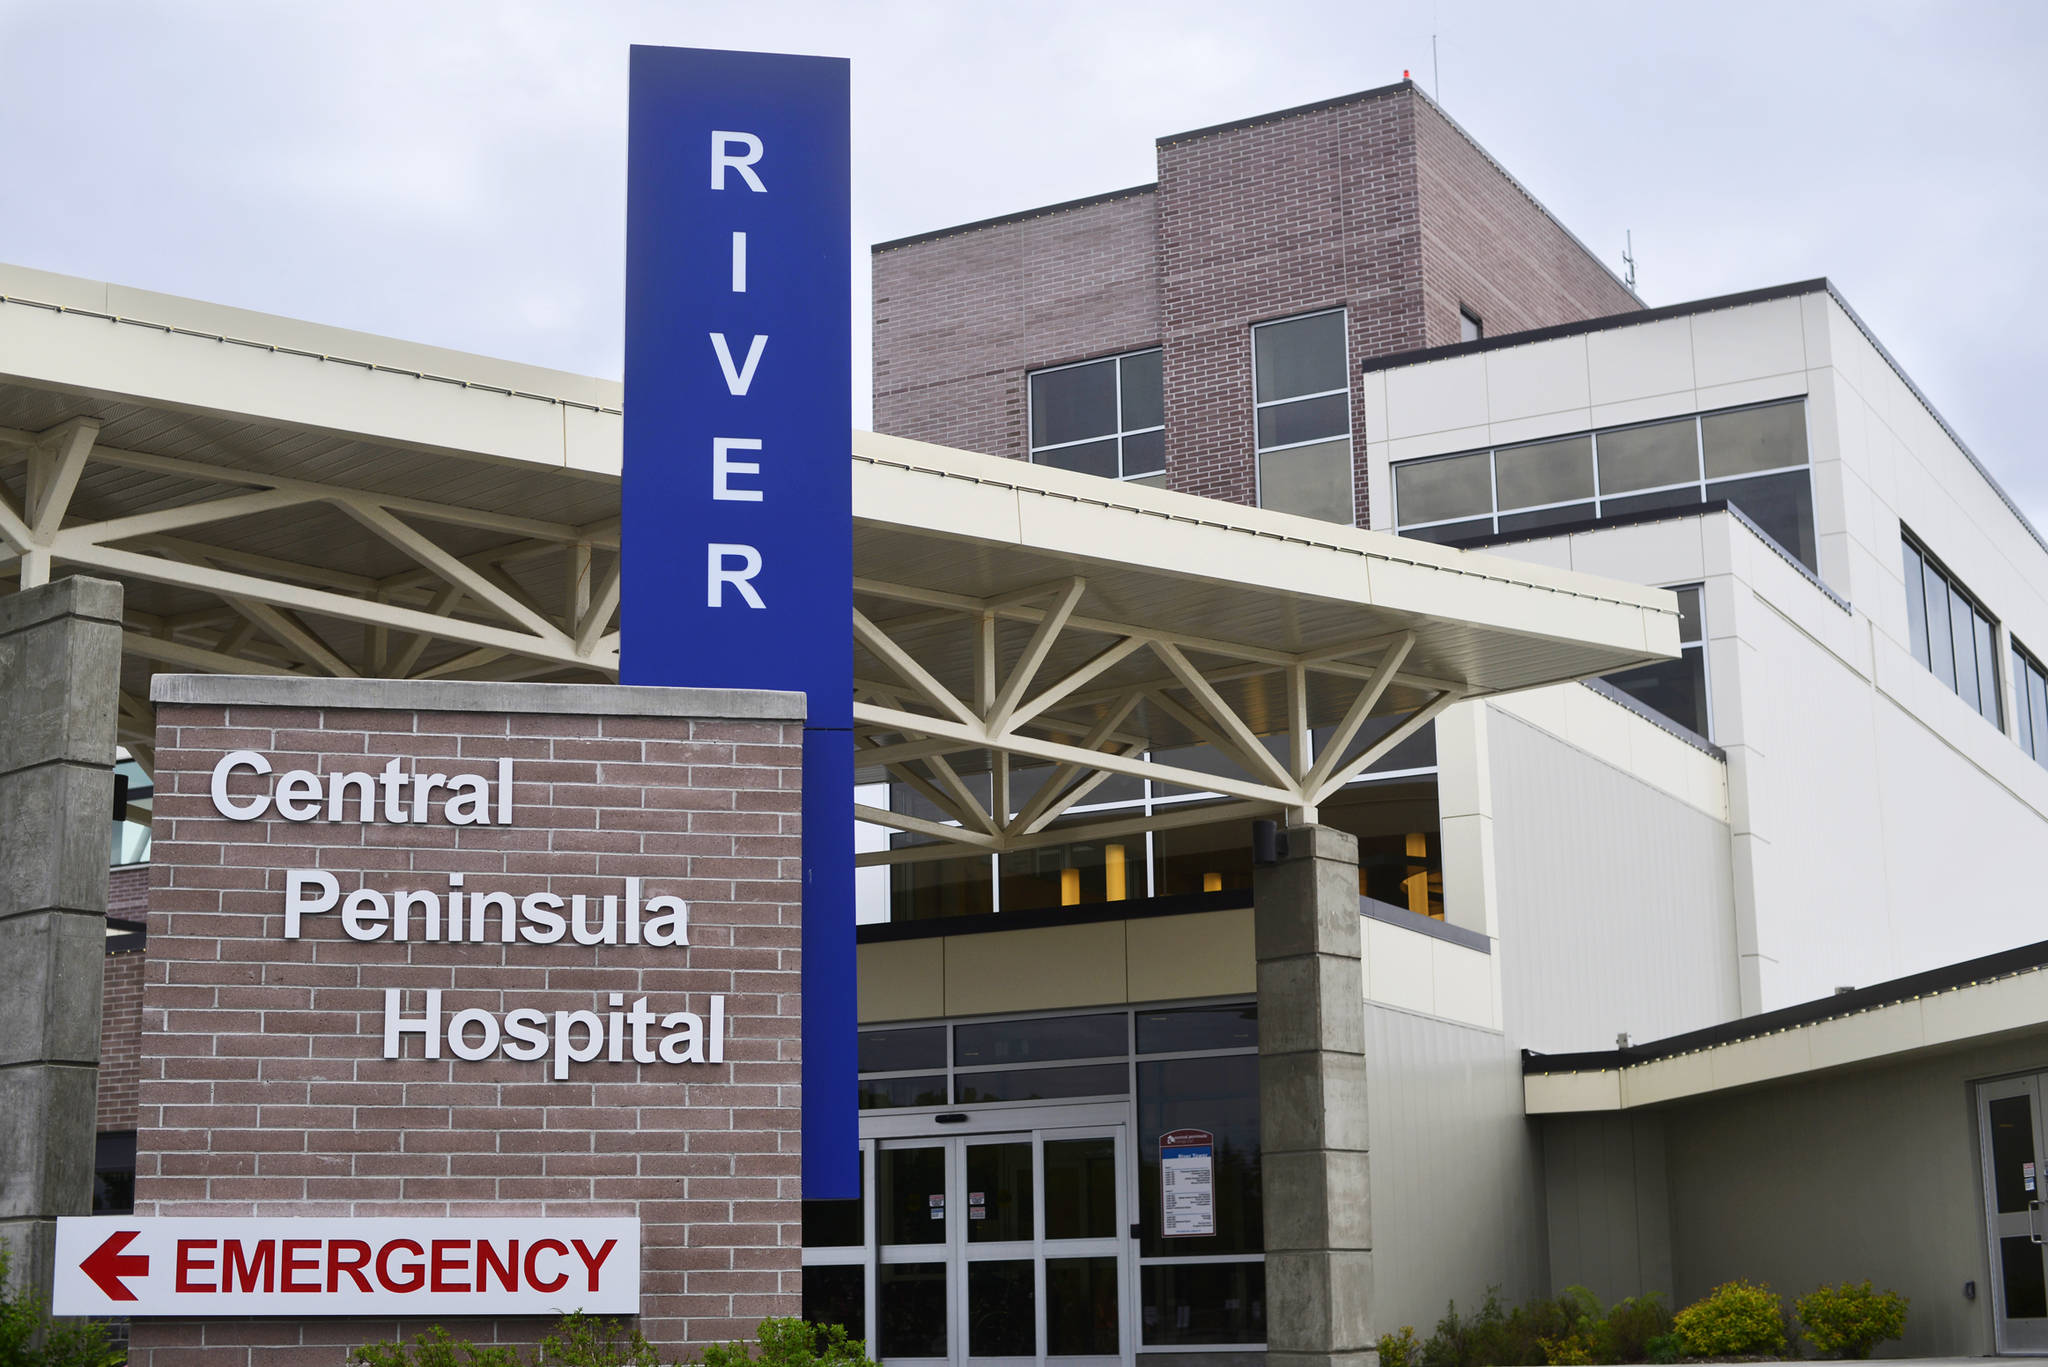 Central Peninsula Hospital’s River Tower specialty services building stands on Sunday, June 24, 2018 in Soldotna, Alaska. The River Tower opened in early 2016 as the fifth phase of an expansion that the hospital began in 2003. Phase 6, which began with a cermonial ground-breaking on Friday, will add a new obstetrics center and a cardiac catheterization lab. (Ben Boettger/Peninsula Clarion).